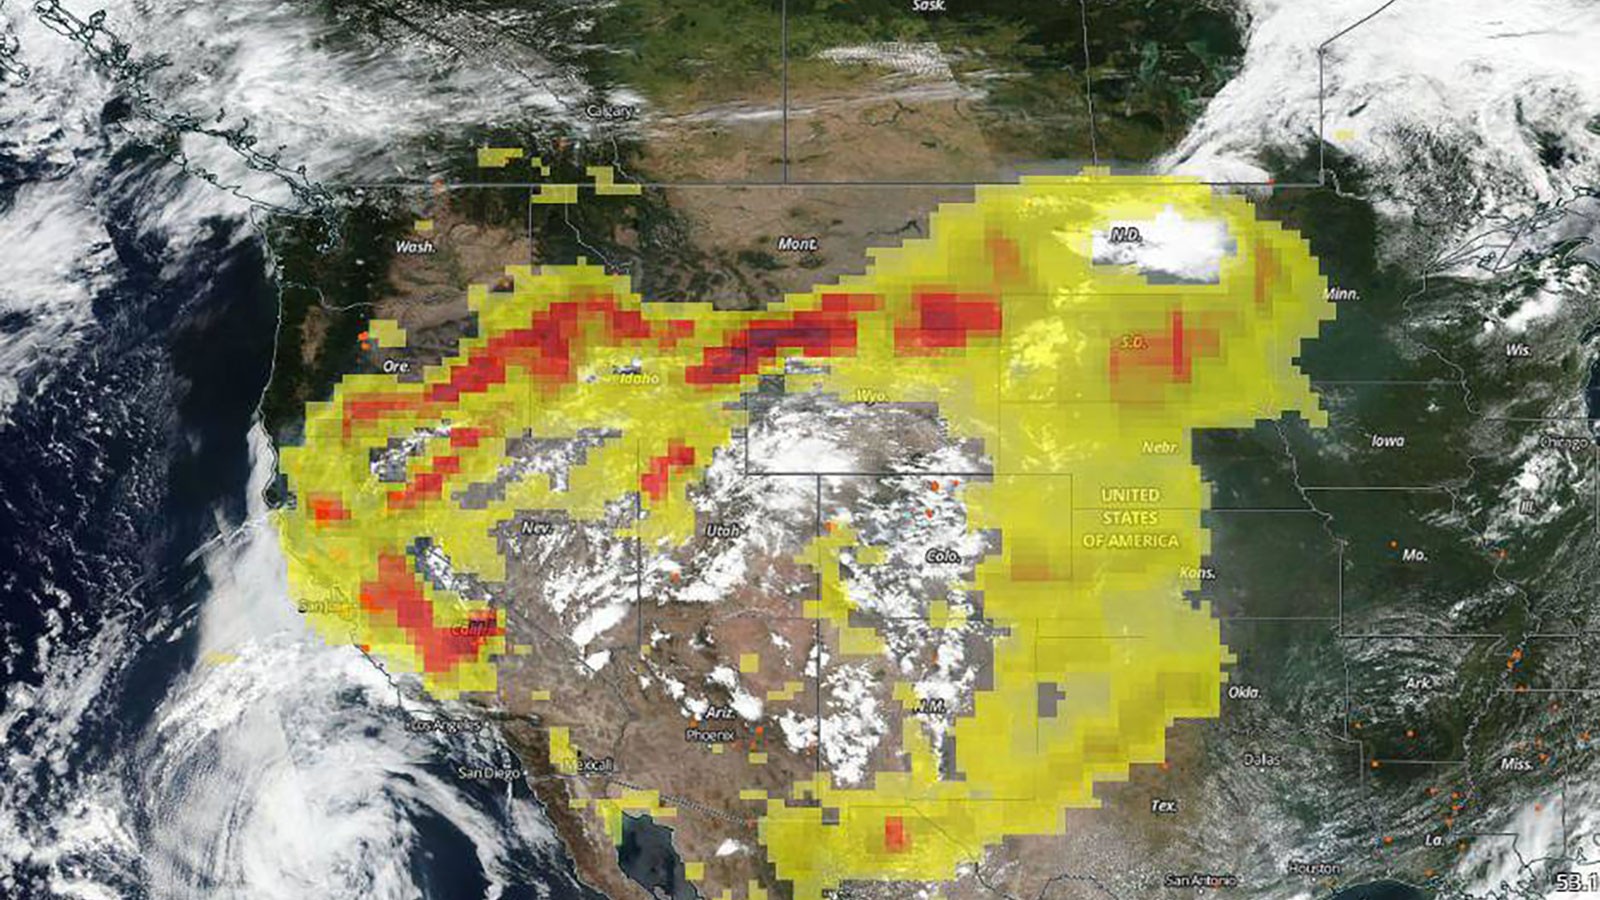 NOAA-NASA satellites tracked aerosols over the U.S. from California fires in late August 2020.